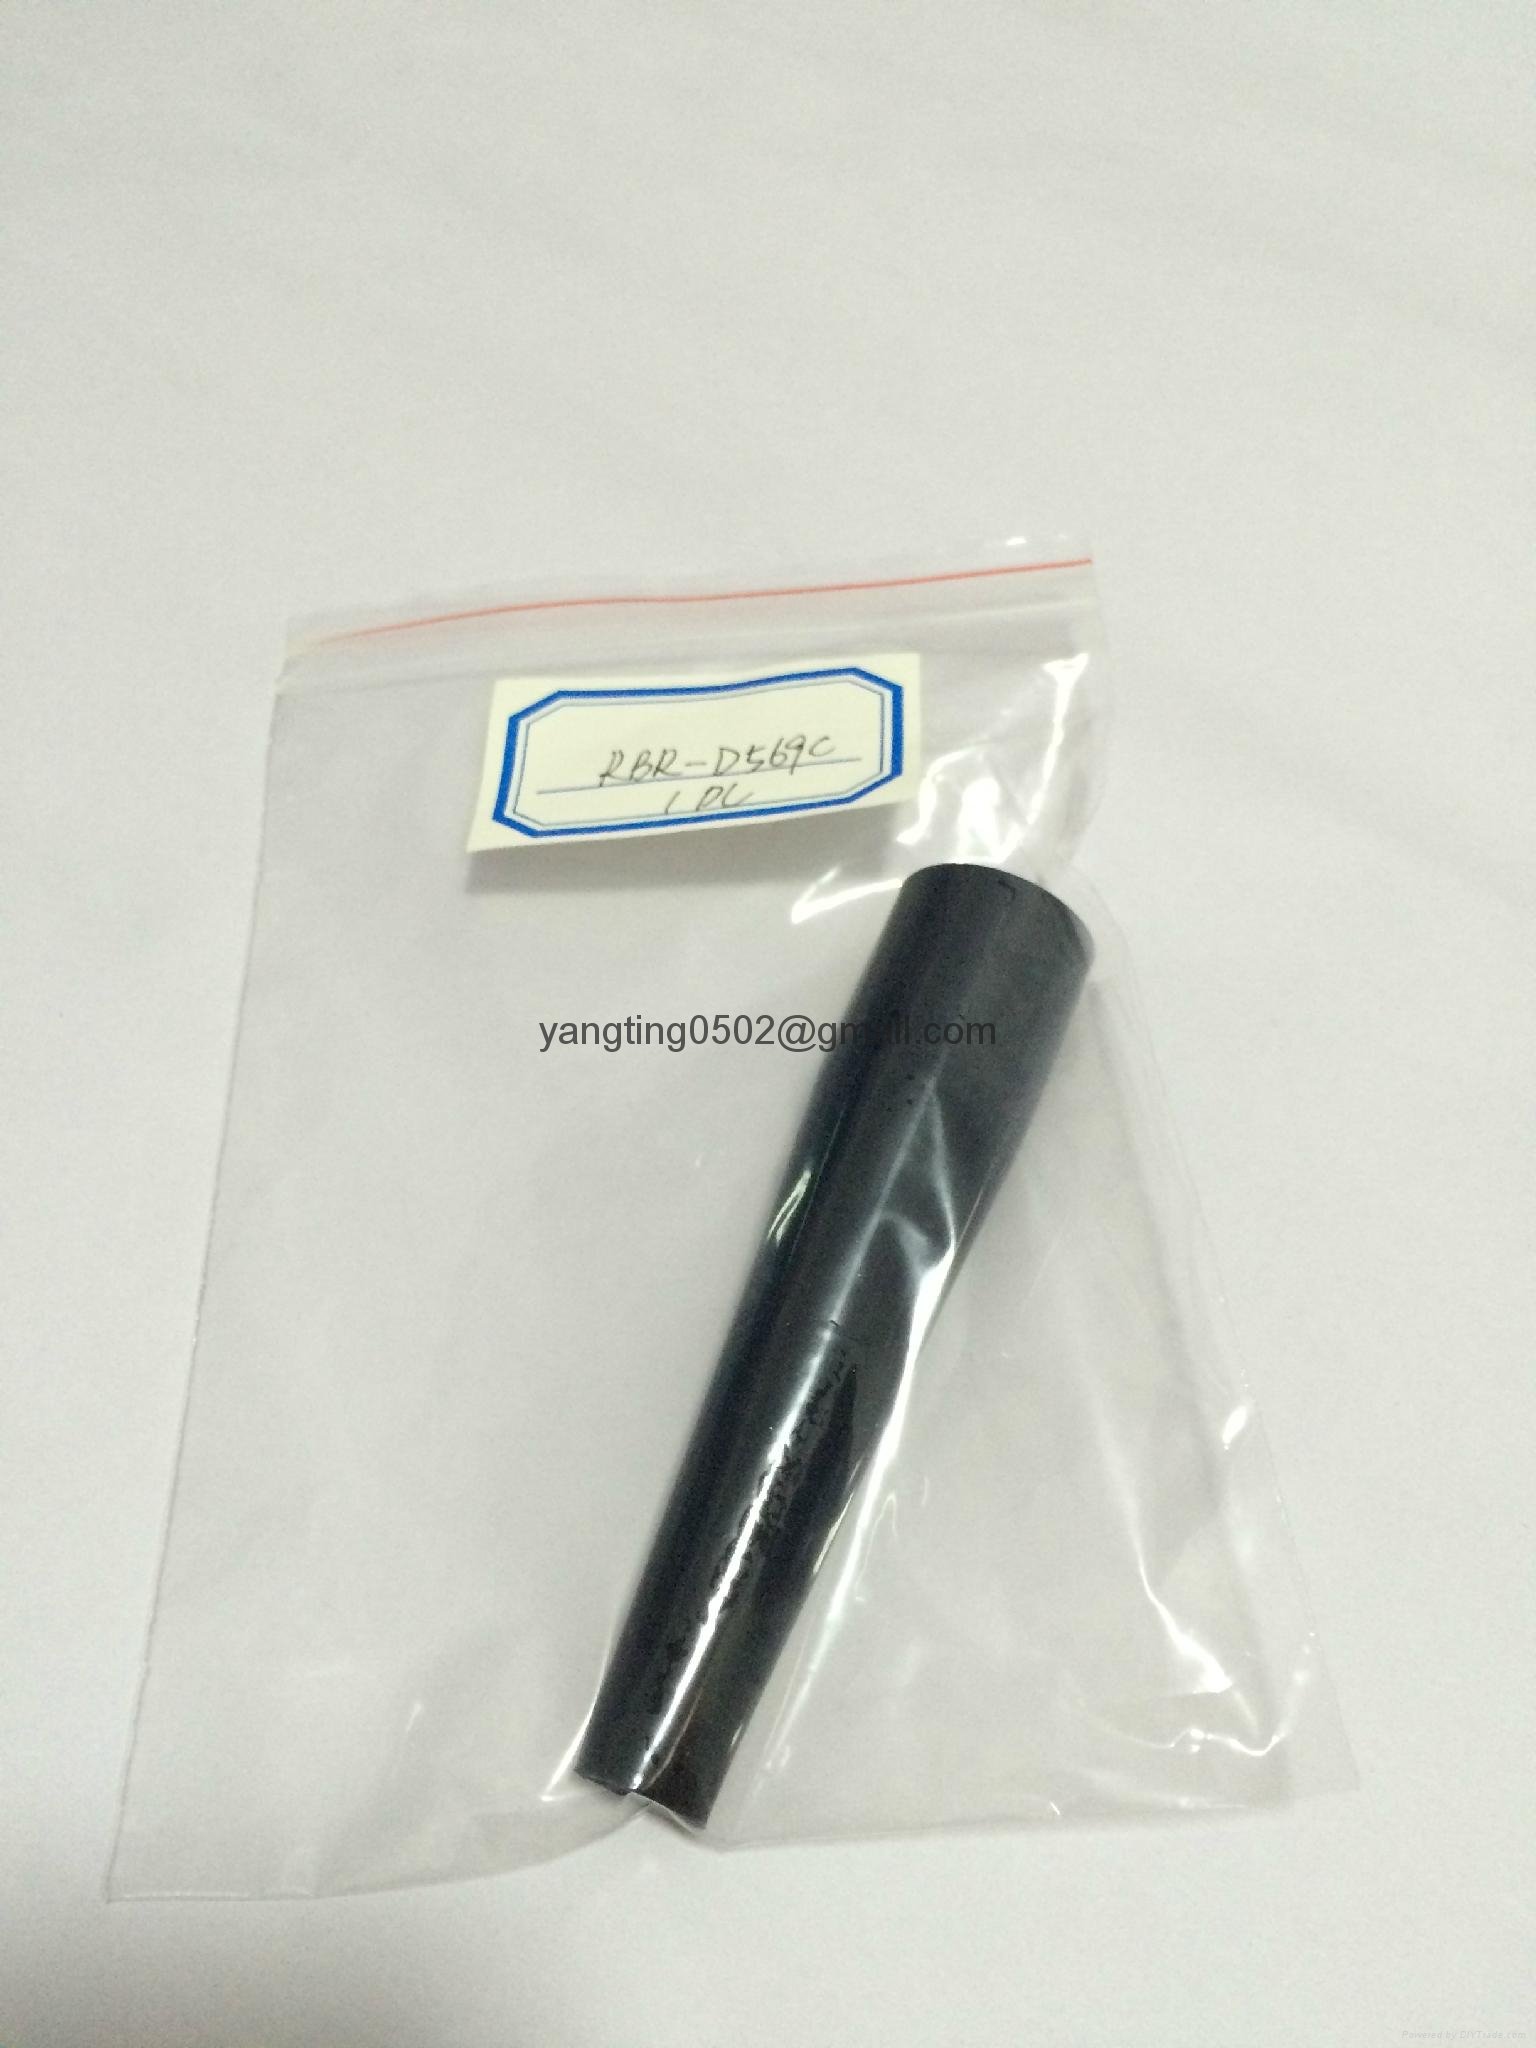 ROOT BRACE RUBBER LG CONNECTOR Pentax Endoscope